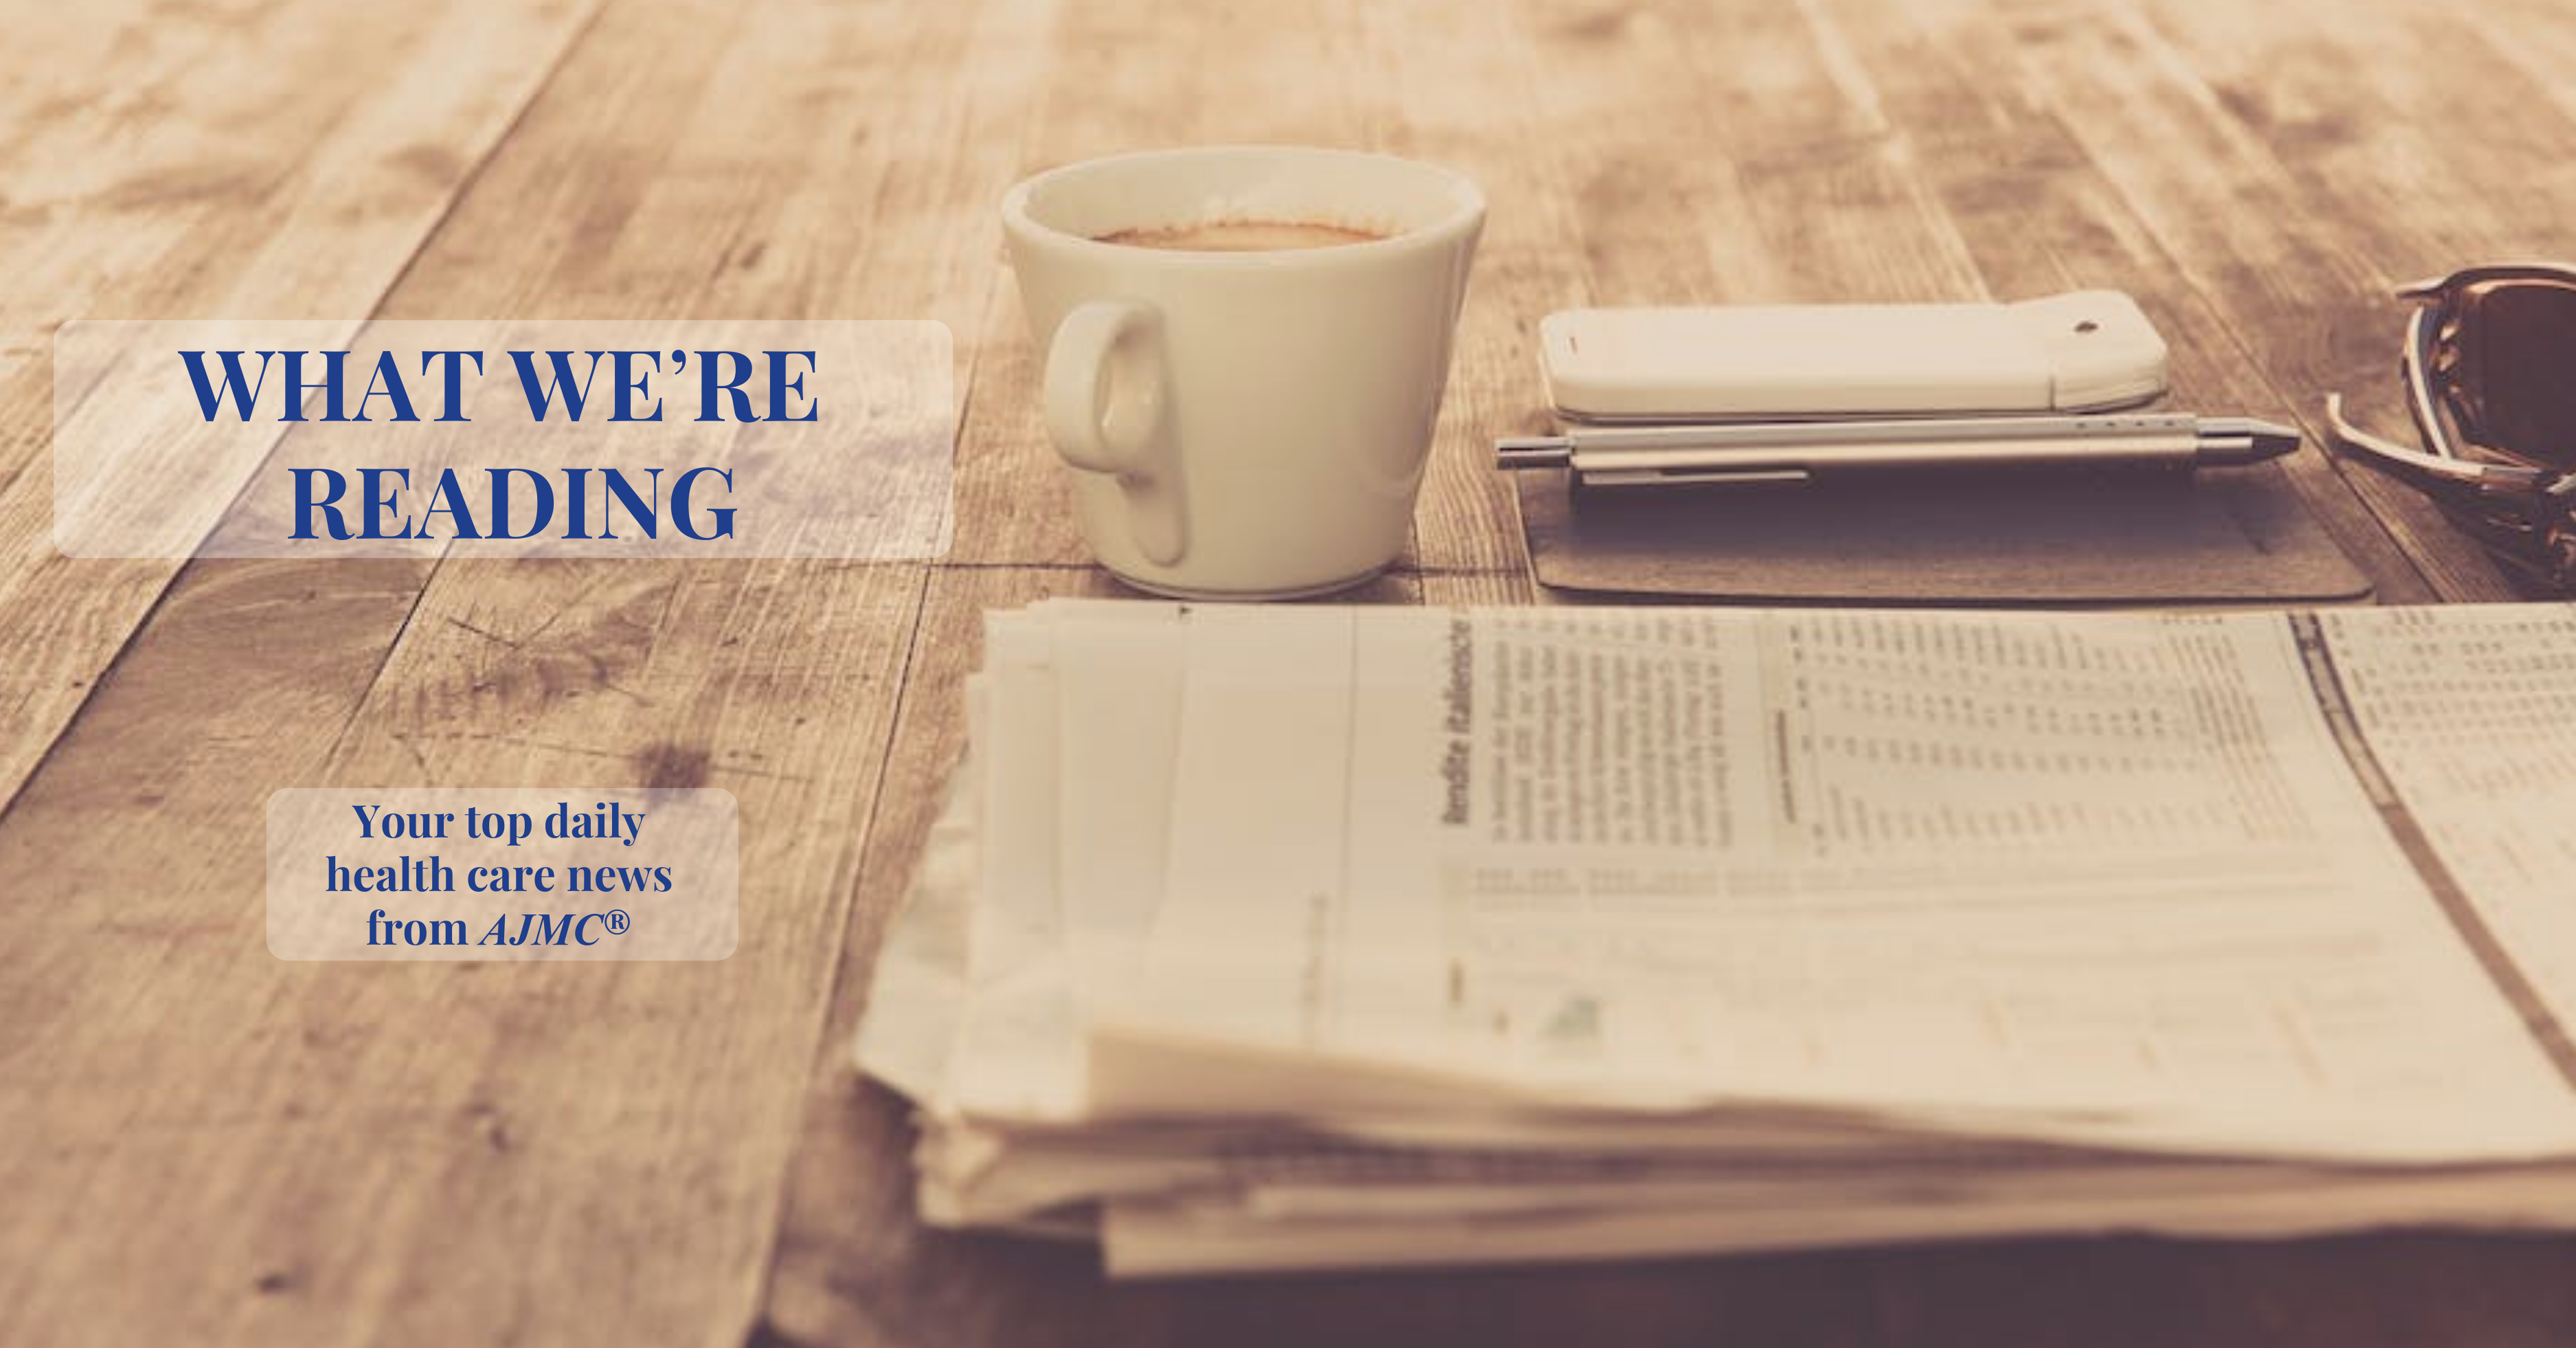 image of newspapers and coffee on a table with text "What We're Reading: Your top daily health care news from AJMC®"